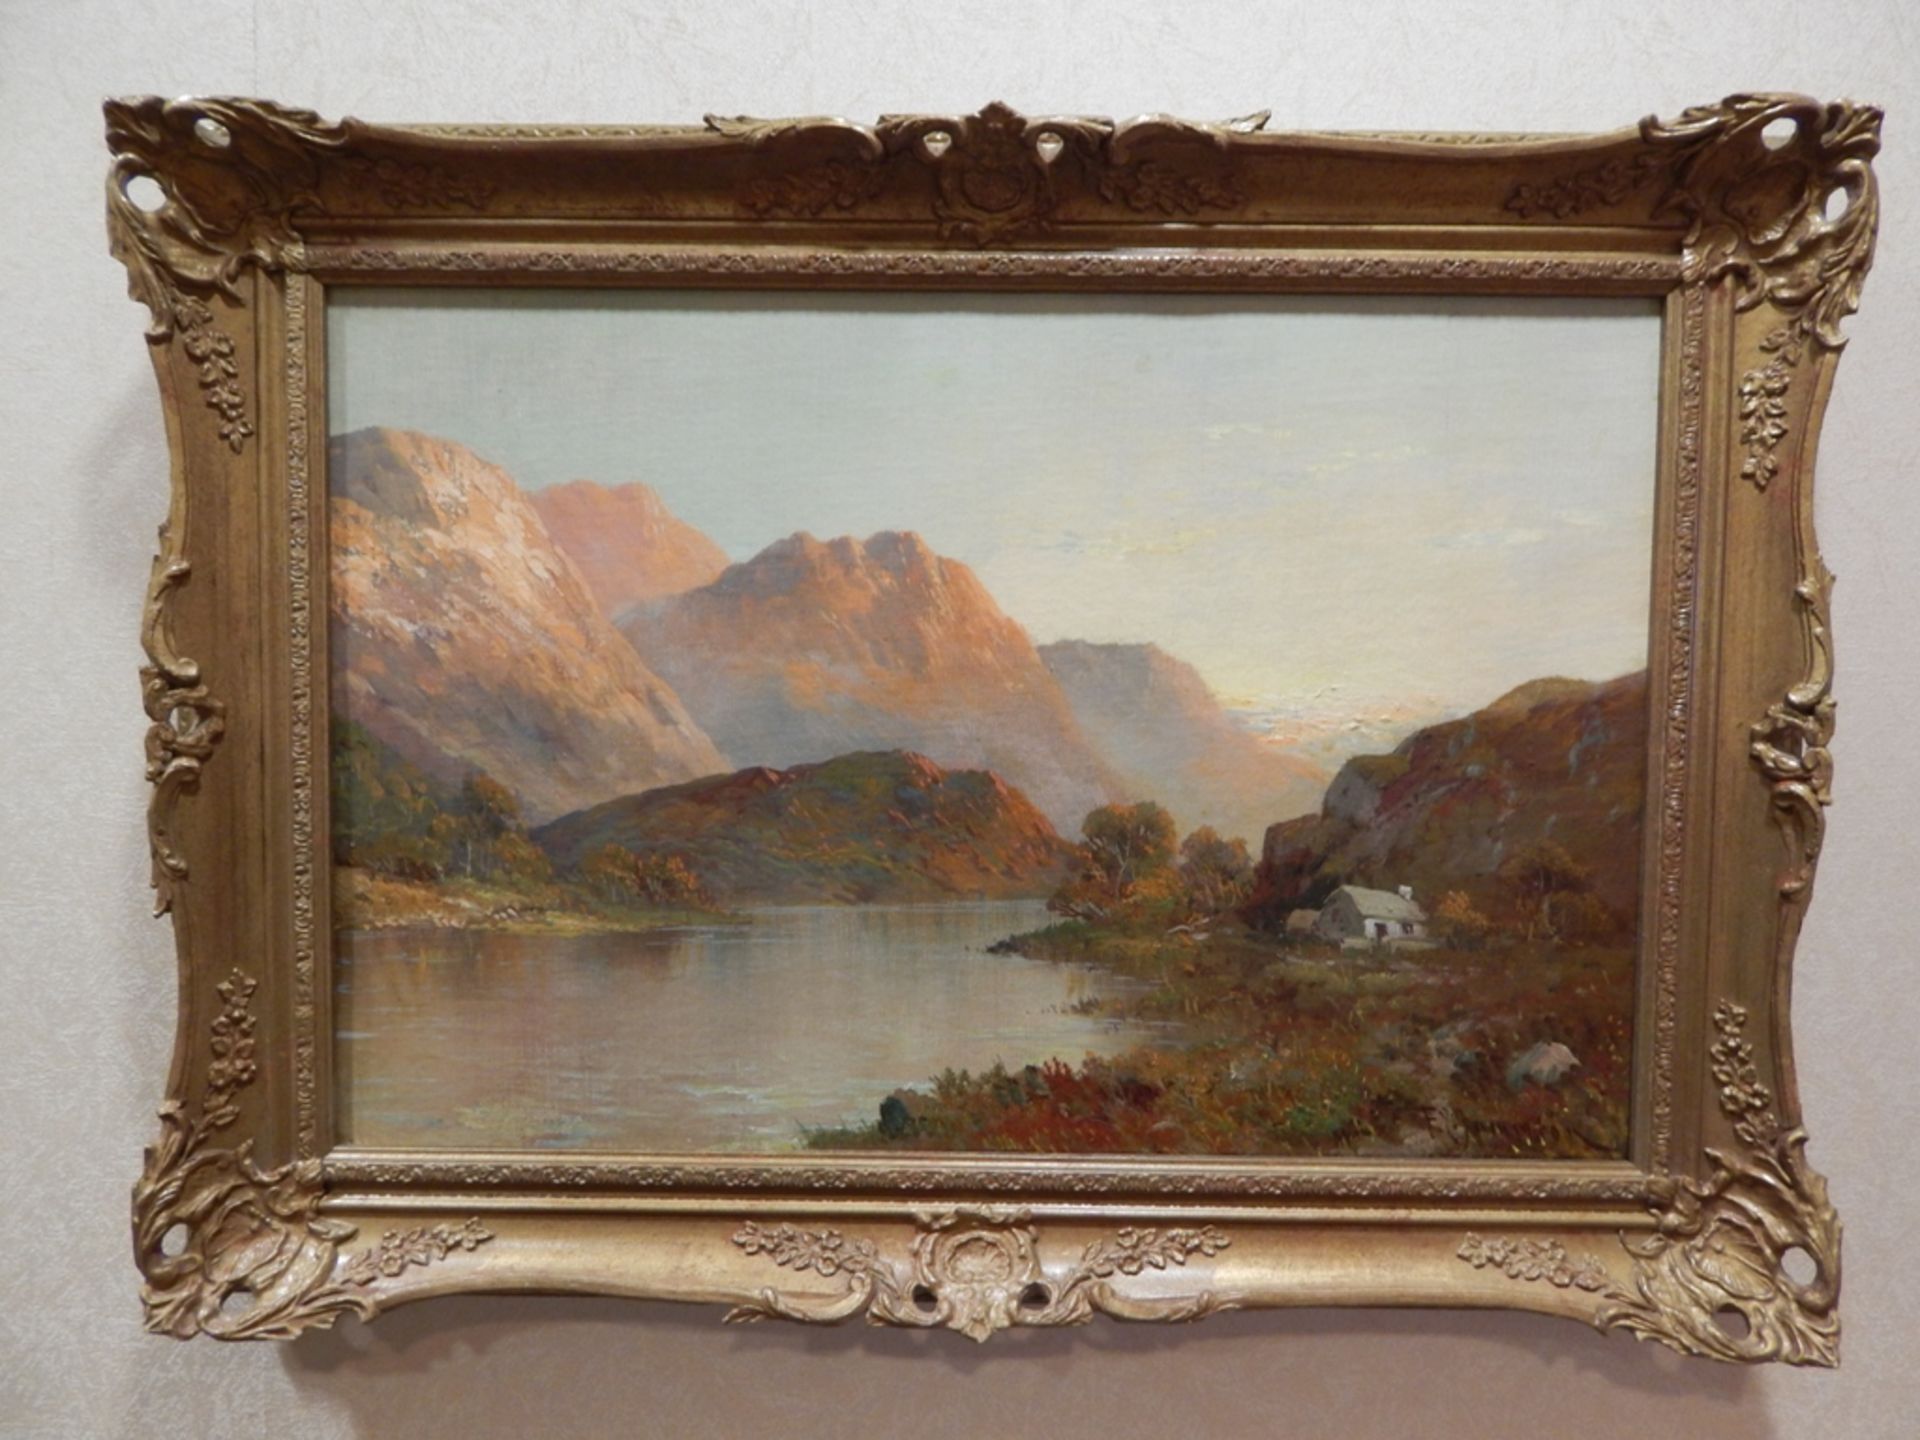 Lake and Mountain Oil on Canvas Painting, approximately 23 in x 15 in, Possible F. E. Jamieson - Image 2 of 5